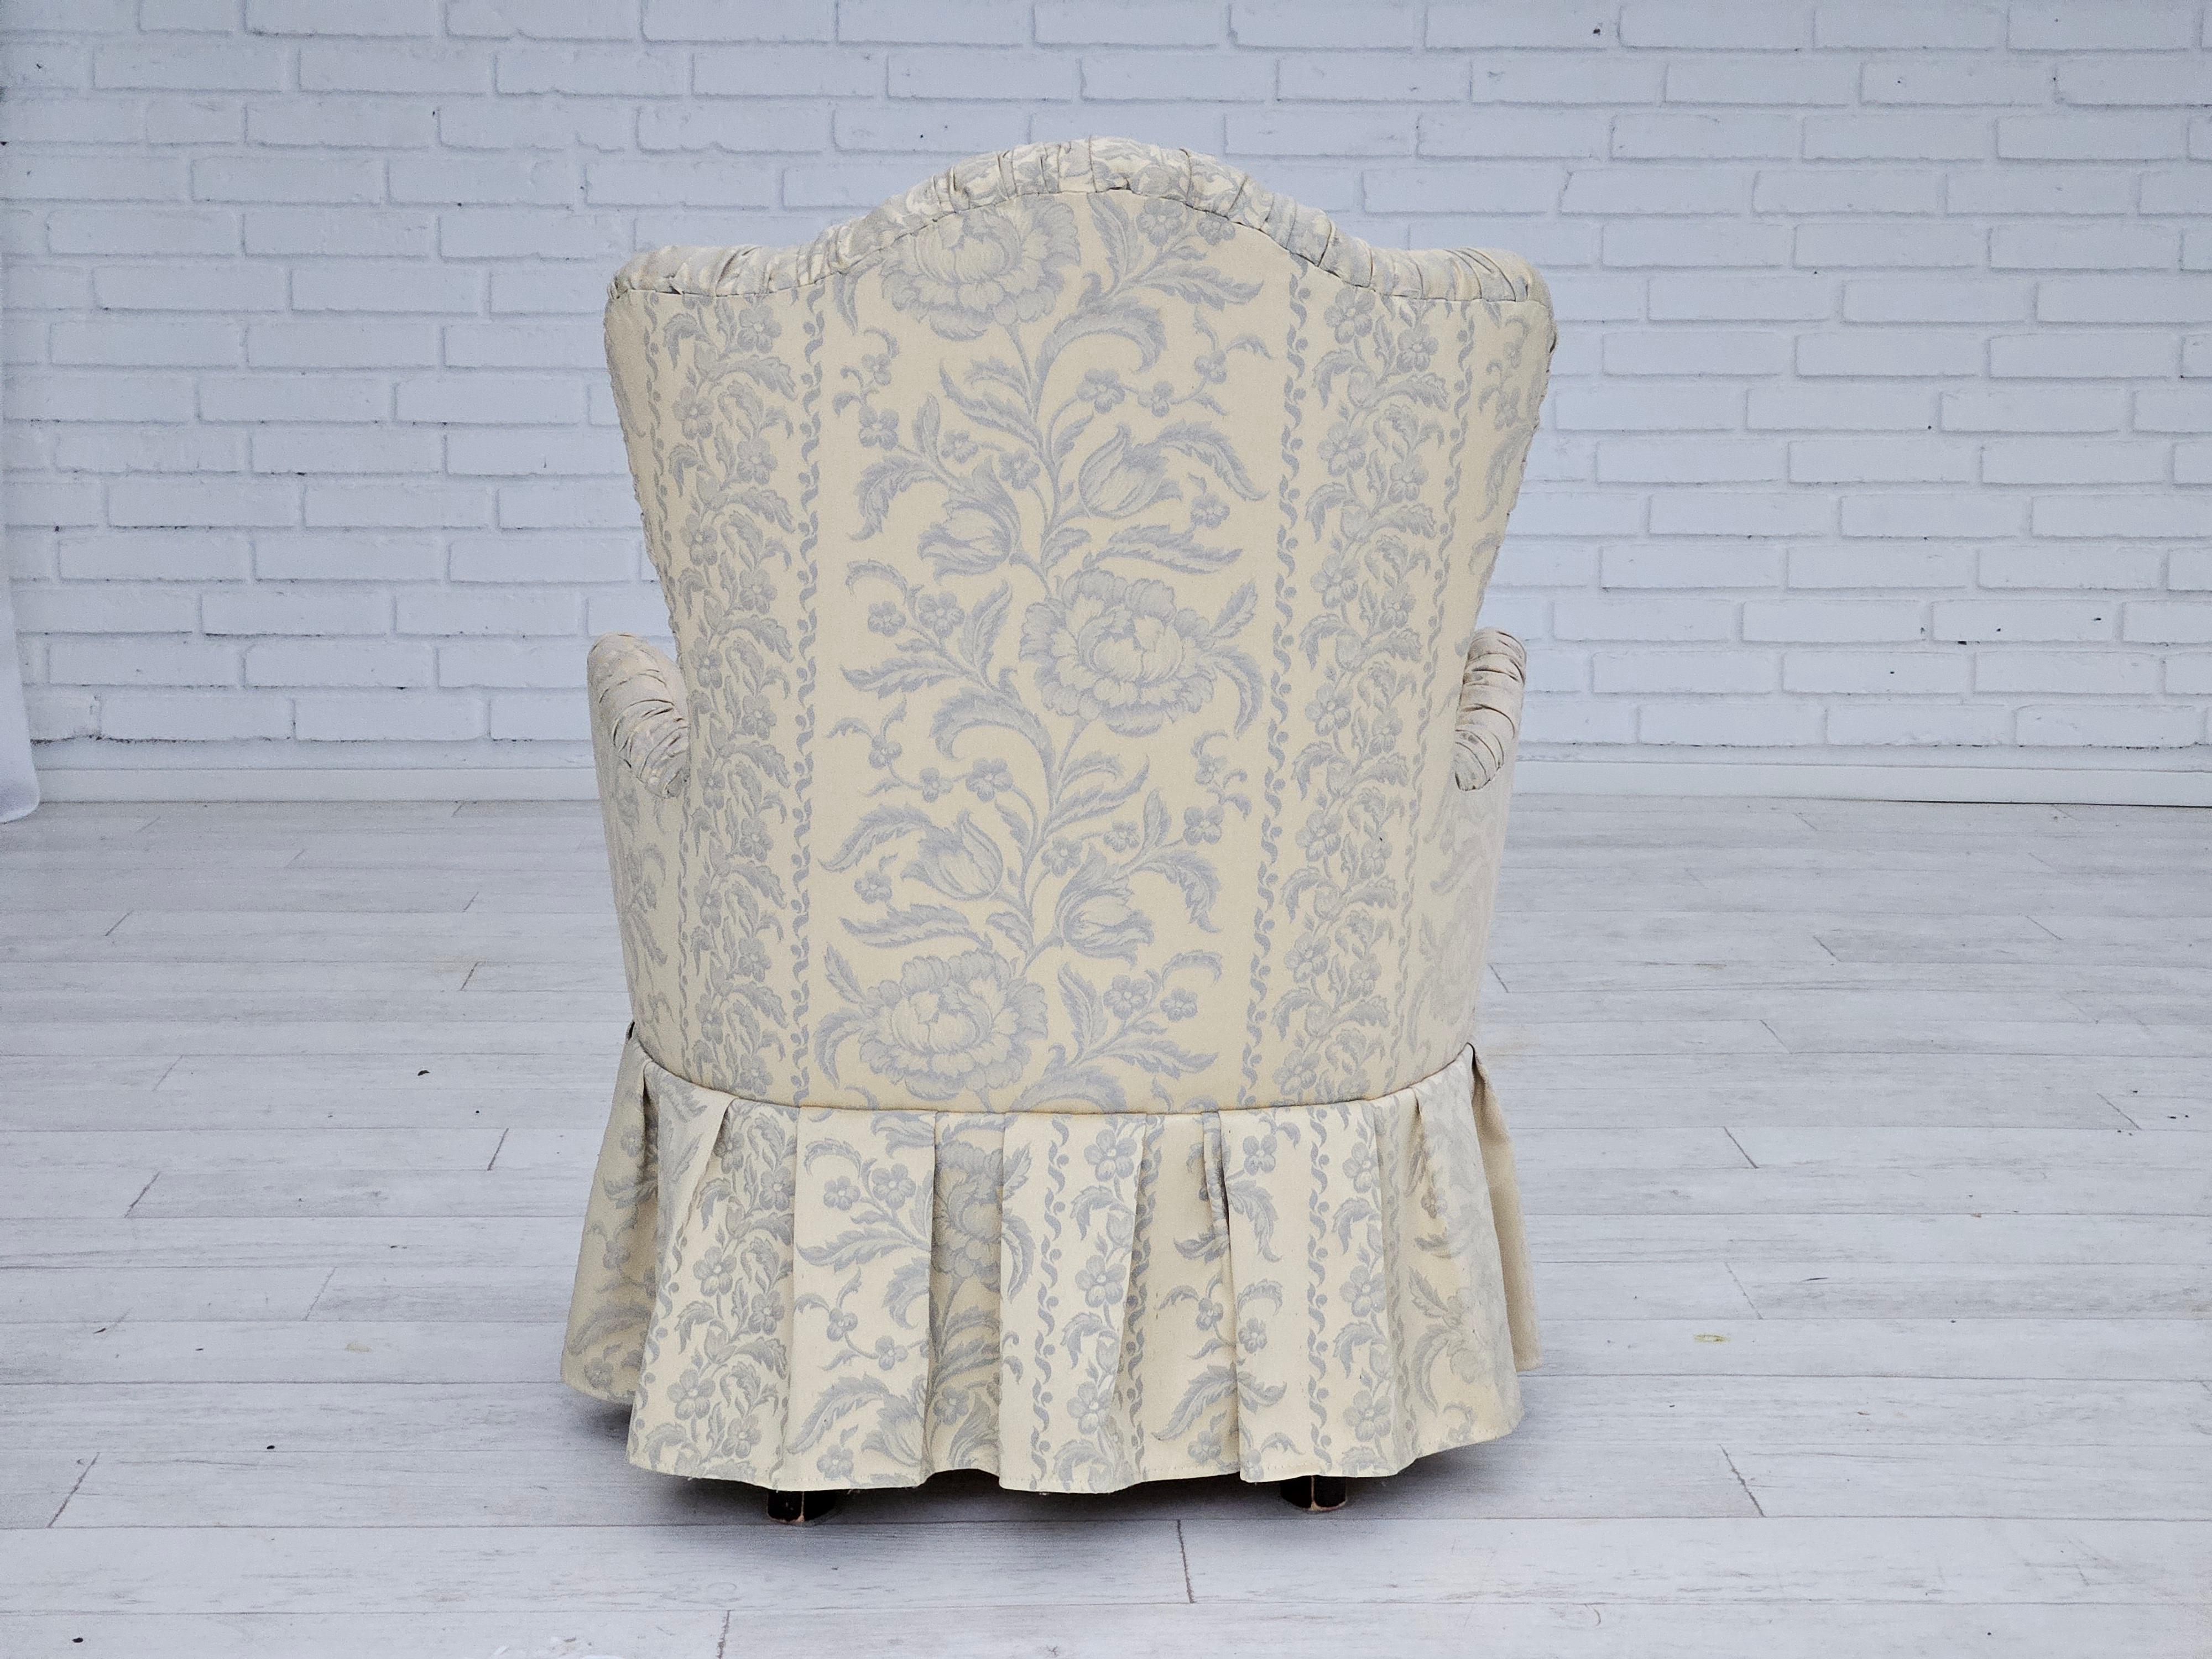 1950s, Danish armchair, reupholstered, creamy/white floral fabric. For Sale 4